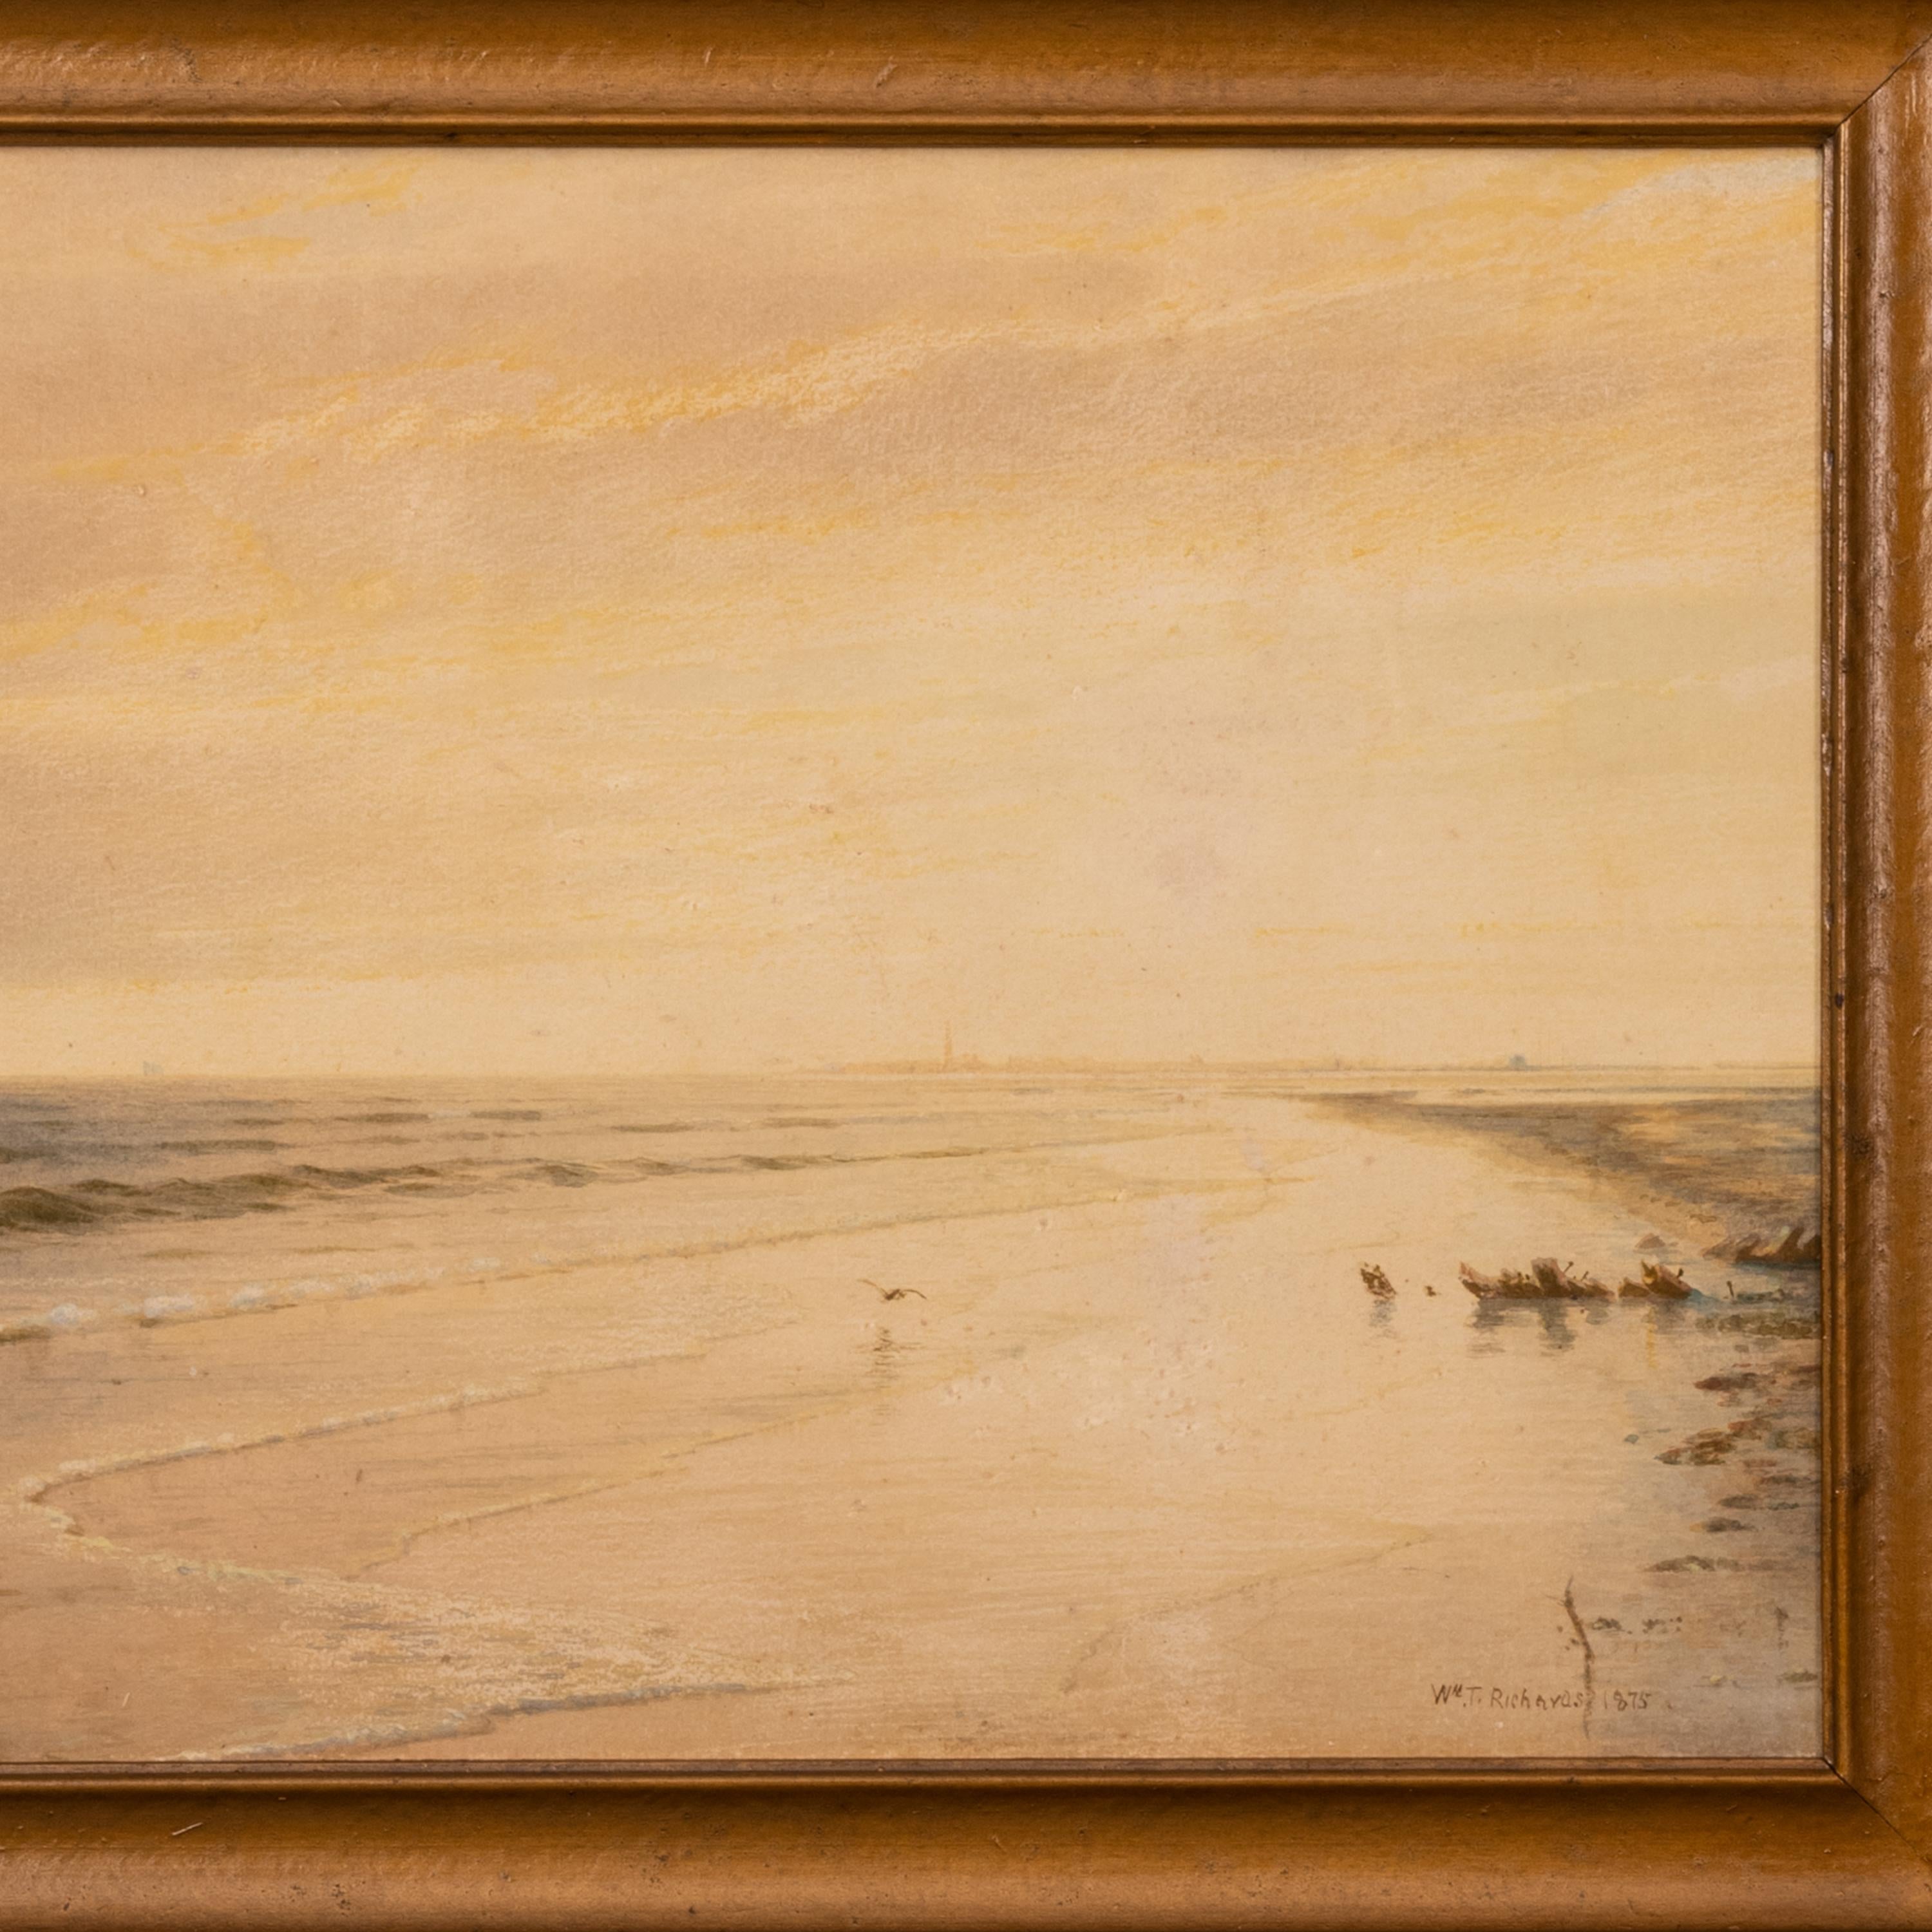 A fine and important painting by the celebrated American Hudson River School painter William Trost Richards (1833-1905), the painting depicting the coastline at sunset Atlantic City, NJ, signed and dated 1875.
This watercolor is fresh to the market